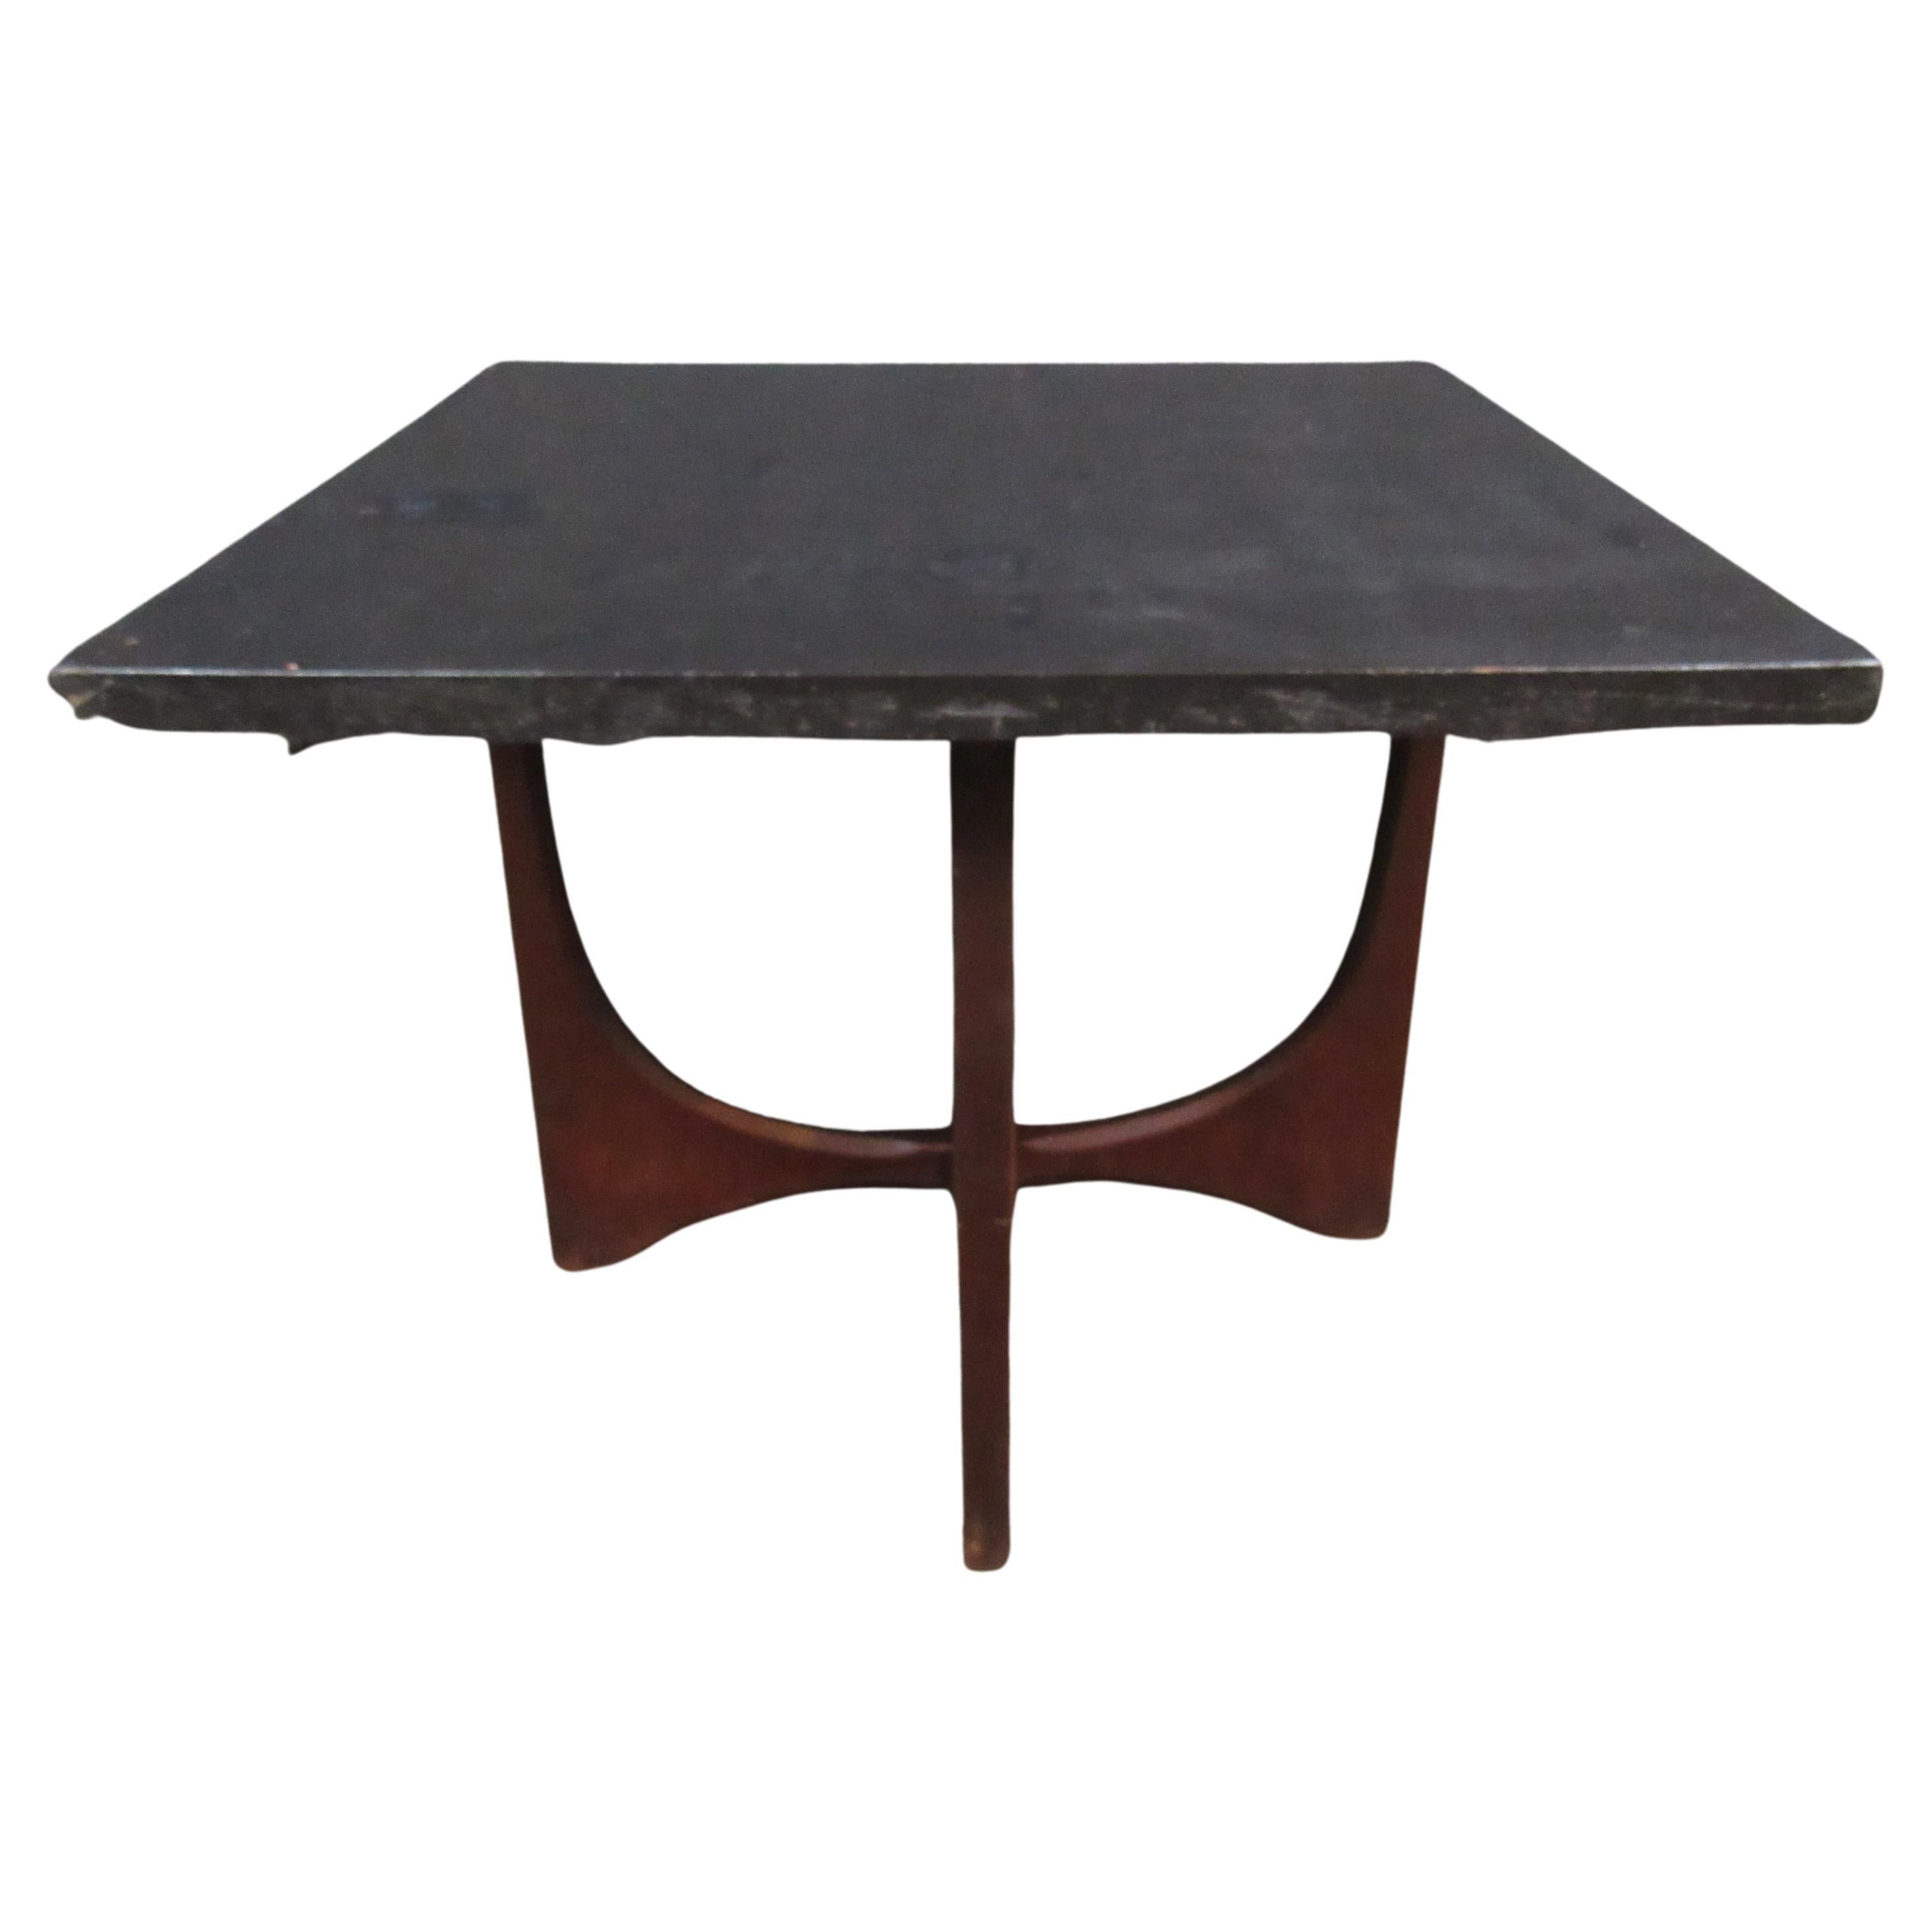 Gorgeous black top side table in the classic style of legendary designer Adrian Pearsall! Sculptural carving on the legs adds uniqueness without sacrificing stability. 
Please confirm item pickup location (New York or New Jersey) with seller.